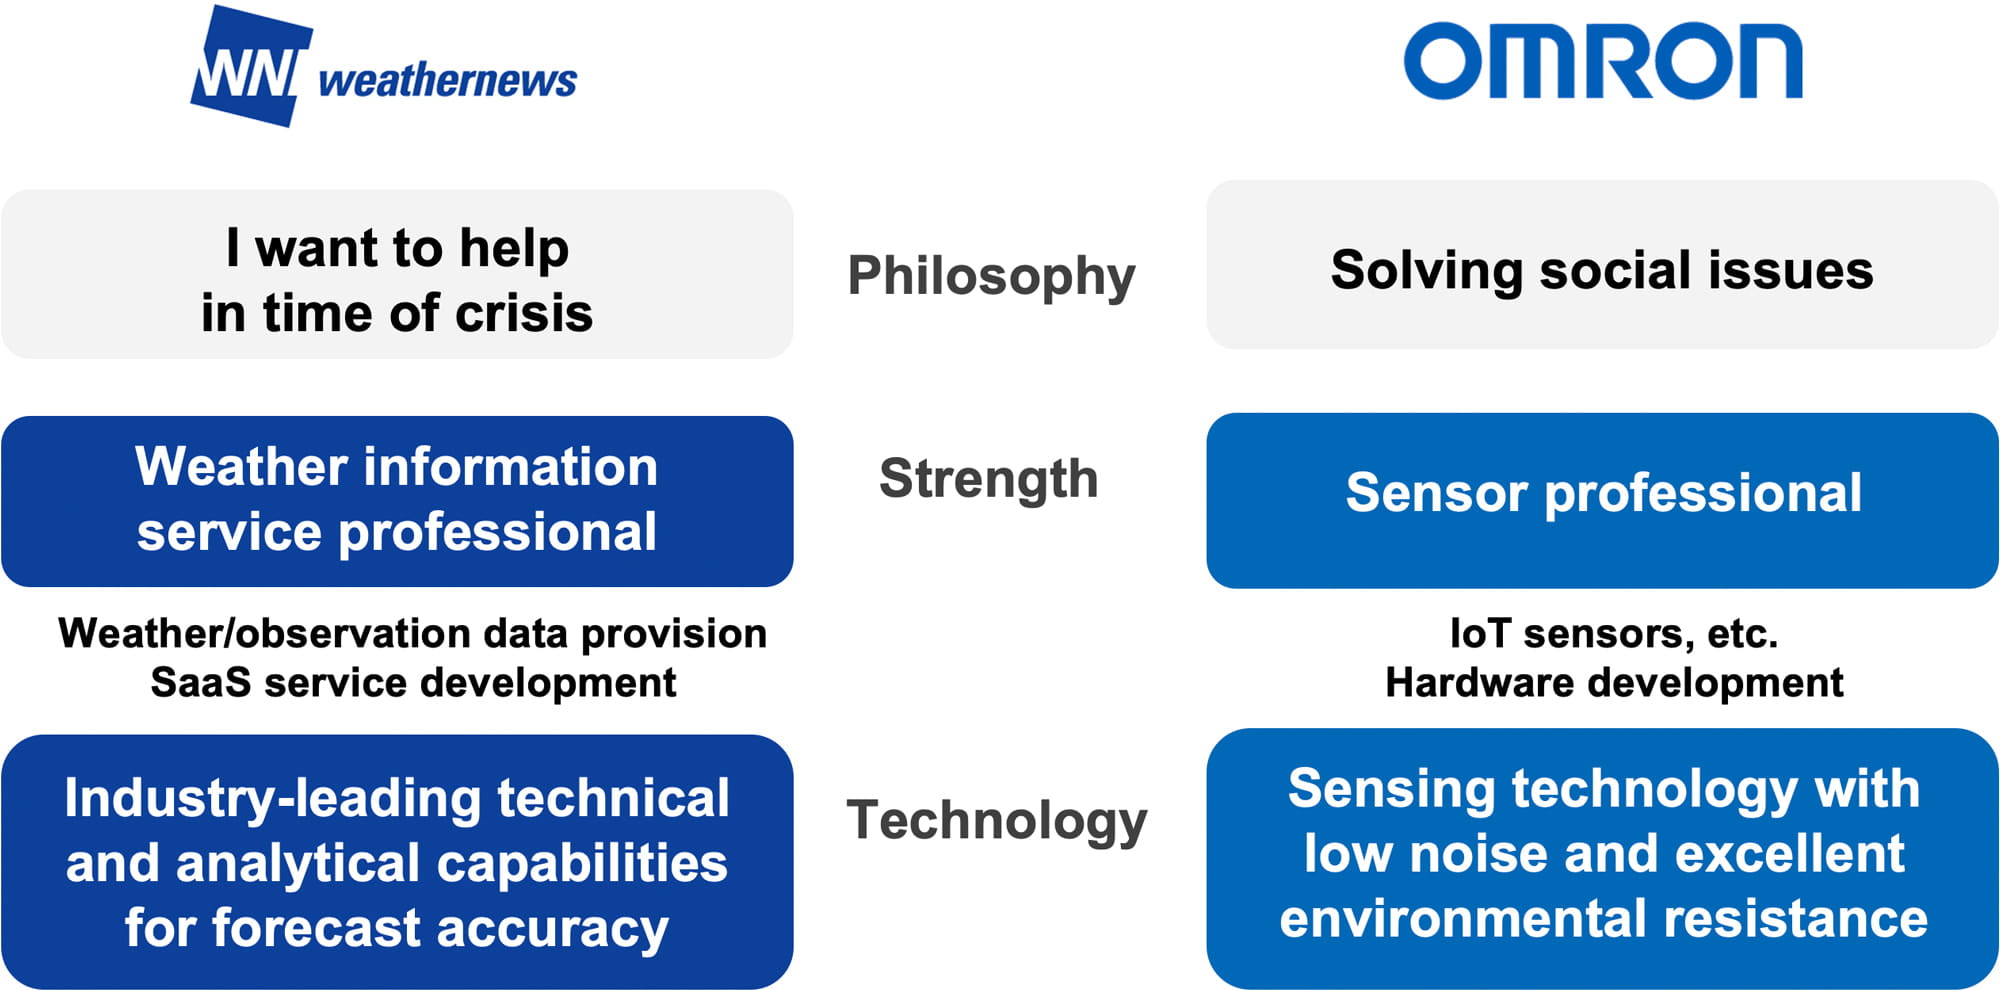 weathernews (Philosophy: We want to be of assistance to people in times of need. Strength: Weather information service professional. Weather/observation data provision SaaS service development. Technology: Industry-leading technical and analytical capabilities for forecast accuracy) OMRON(Philosophy: Solving social issues. Sensor professional: Sensor professional. IoT sensors, etc. Hardware development. Technology: Sensing technology with low noise and excellent environmental resistance)